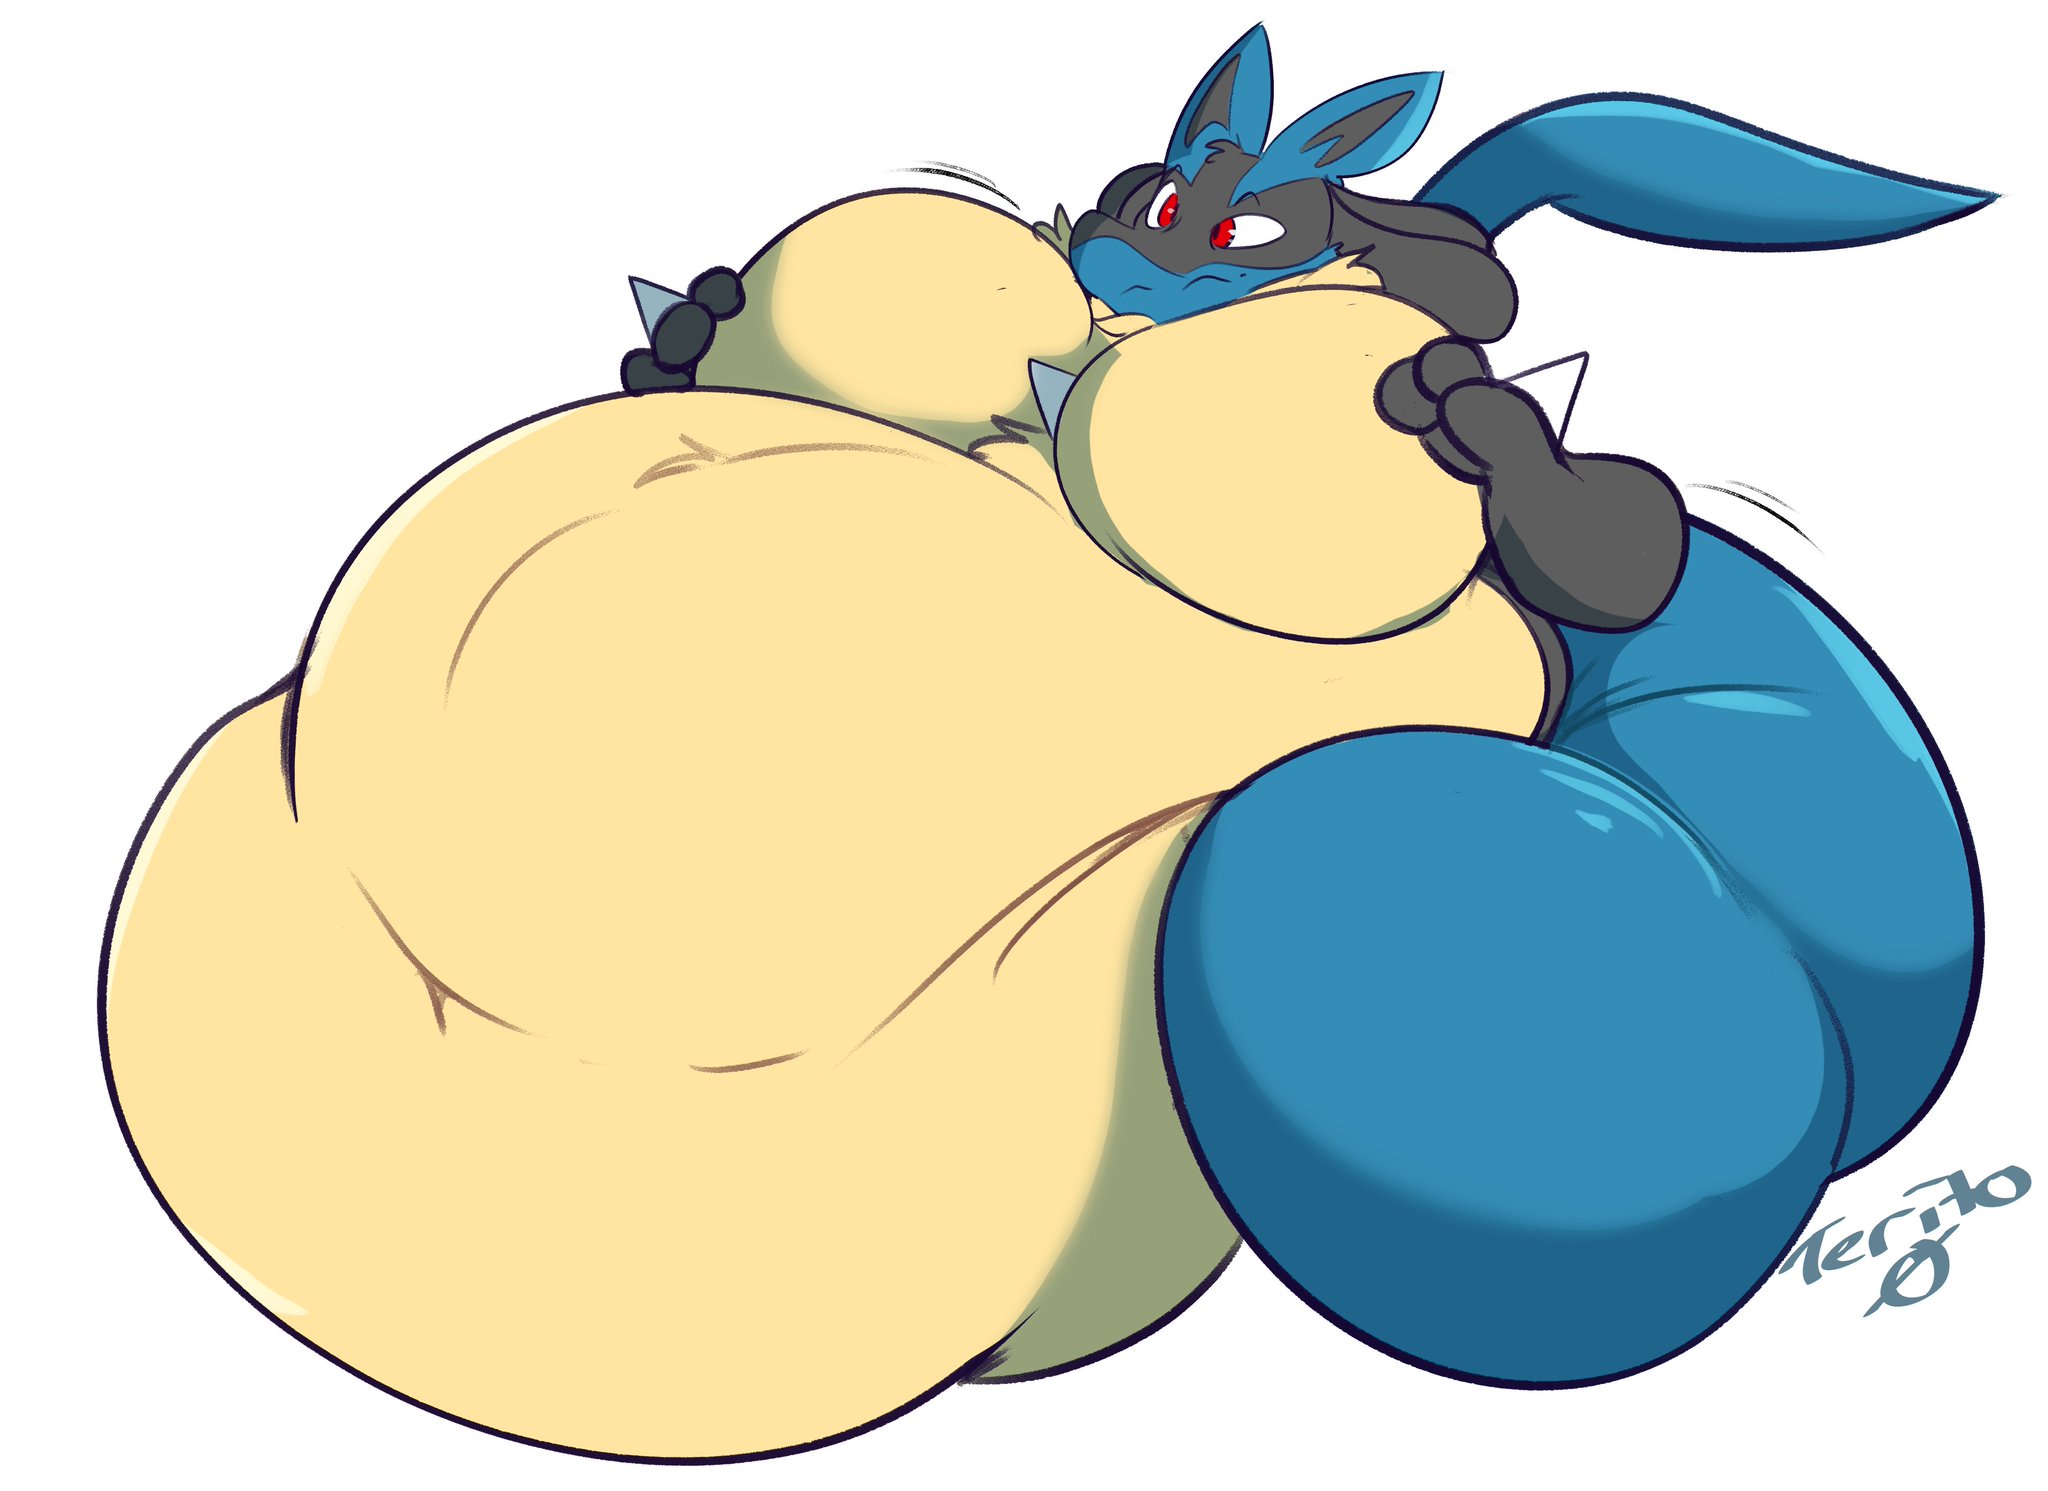 shiny lucario doodle - By @spinycatto on Itaku